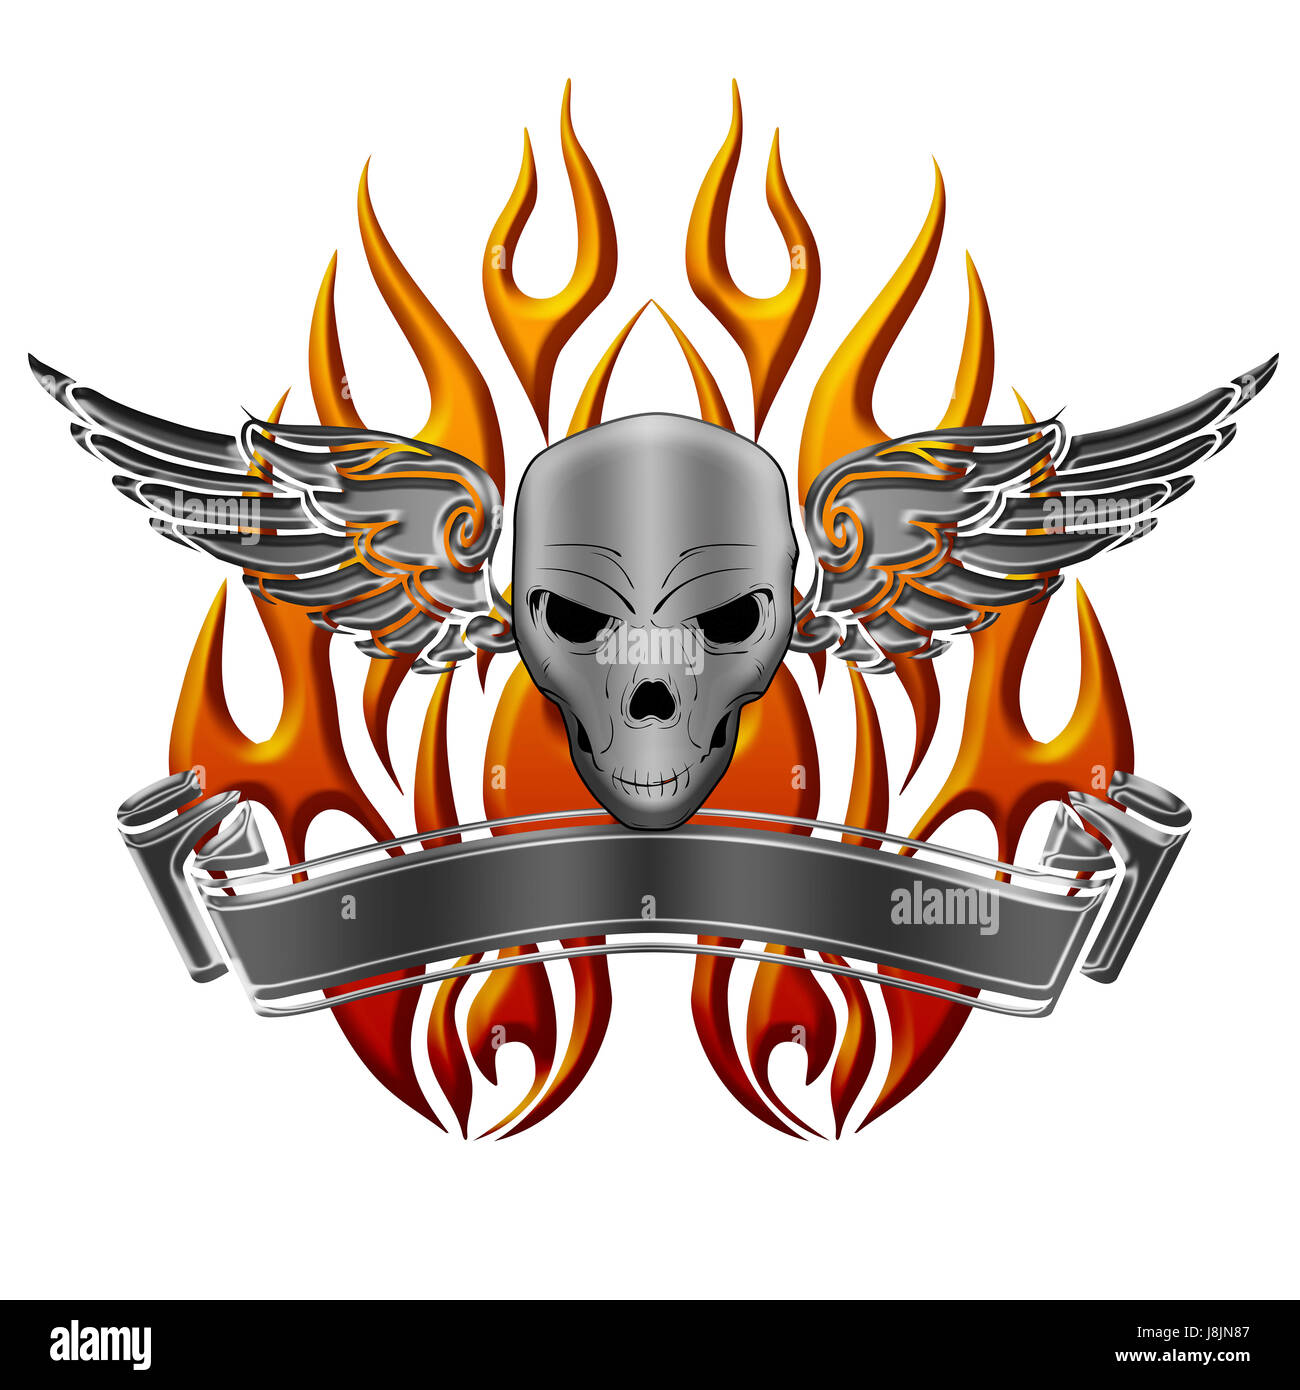 skull, fire, conflagration, flame, flames, banner, metallic, wings, tattoo, Stock Photo